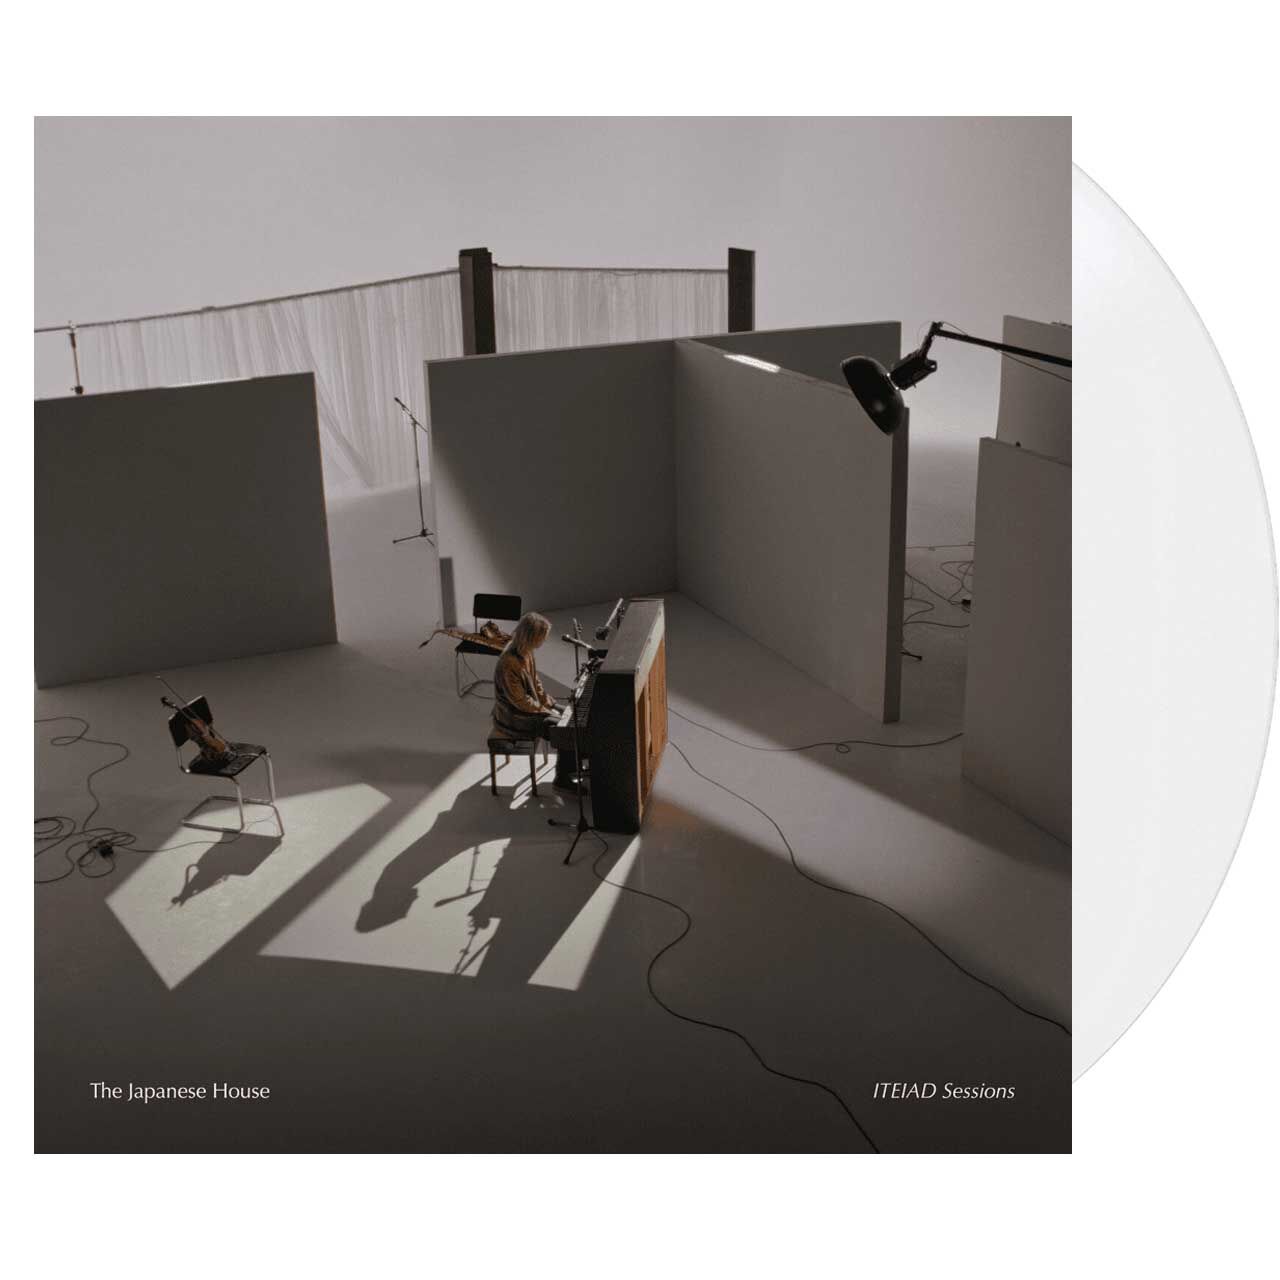 THE JAPANESE HOUSE ITEIAD Sessions RSD White 1LP Vinyl, Cover Dent